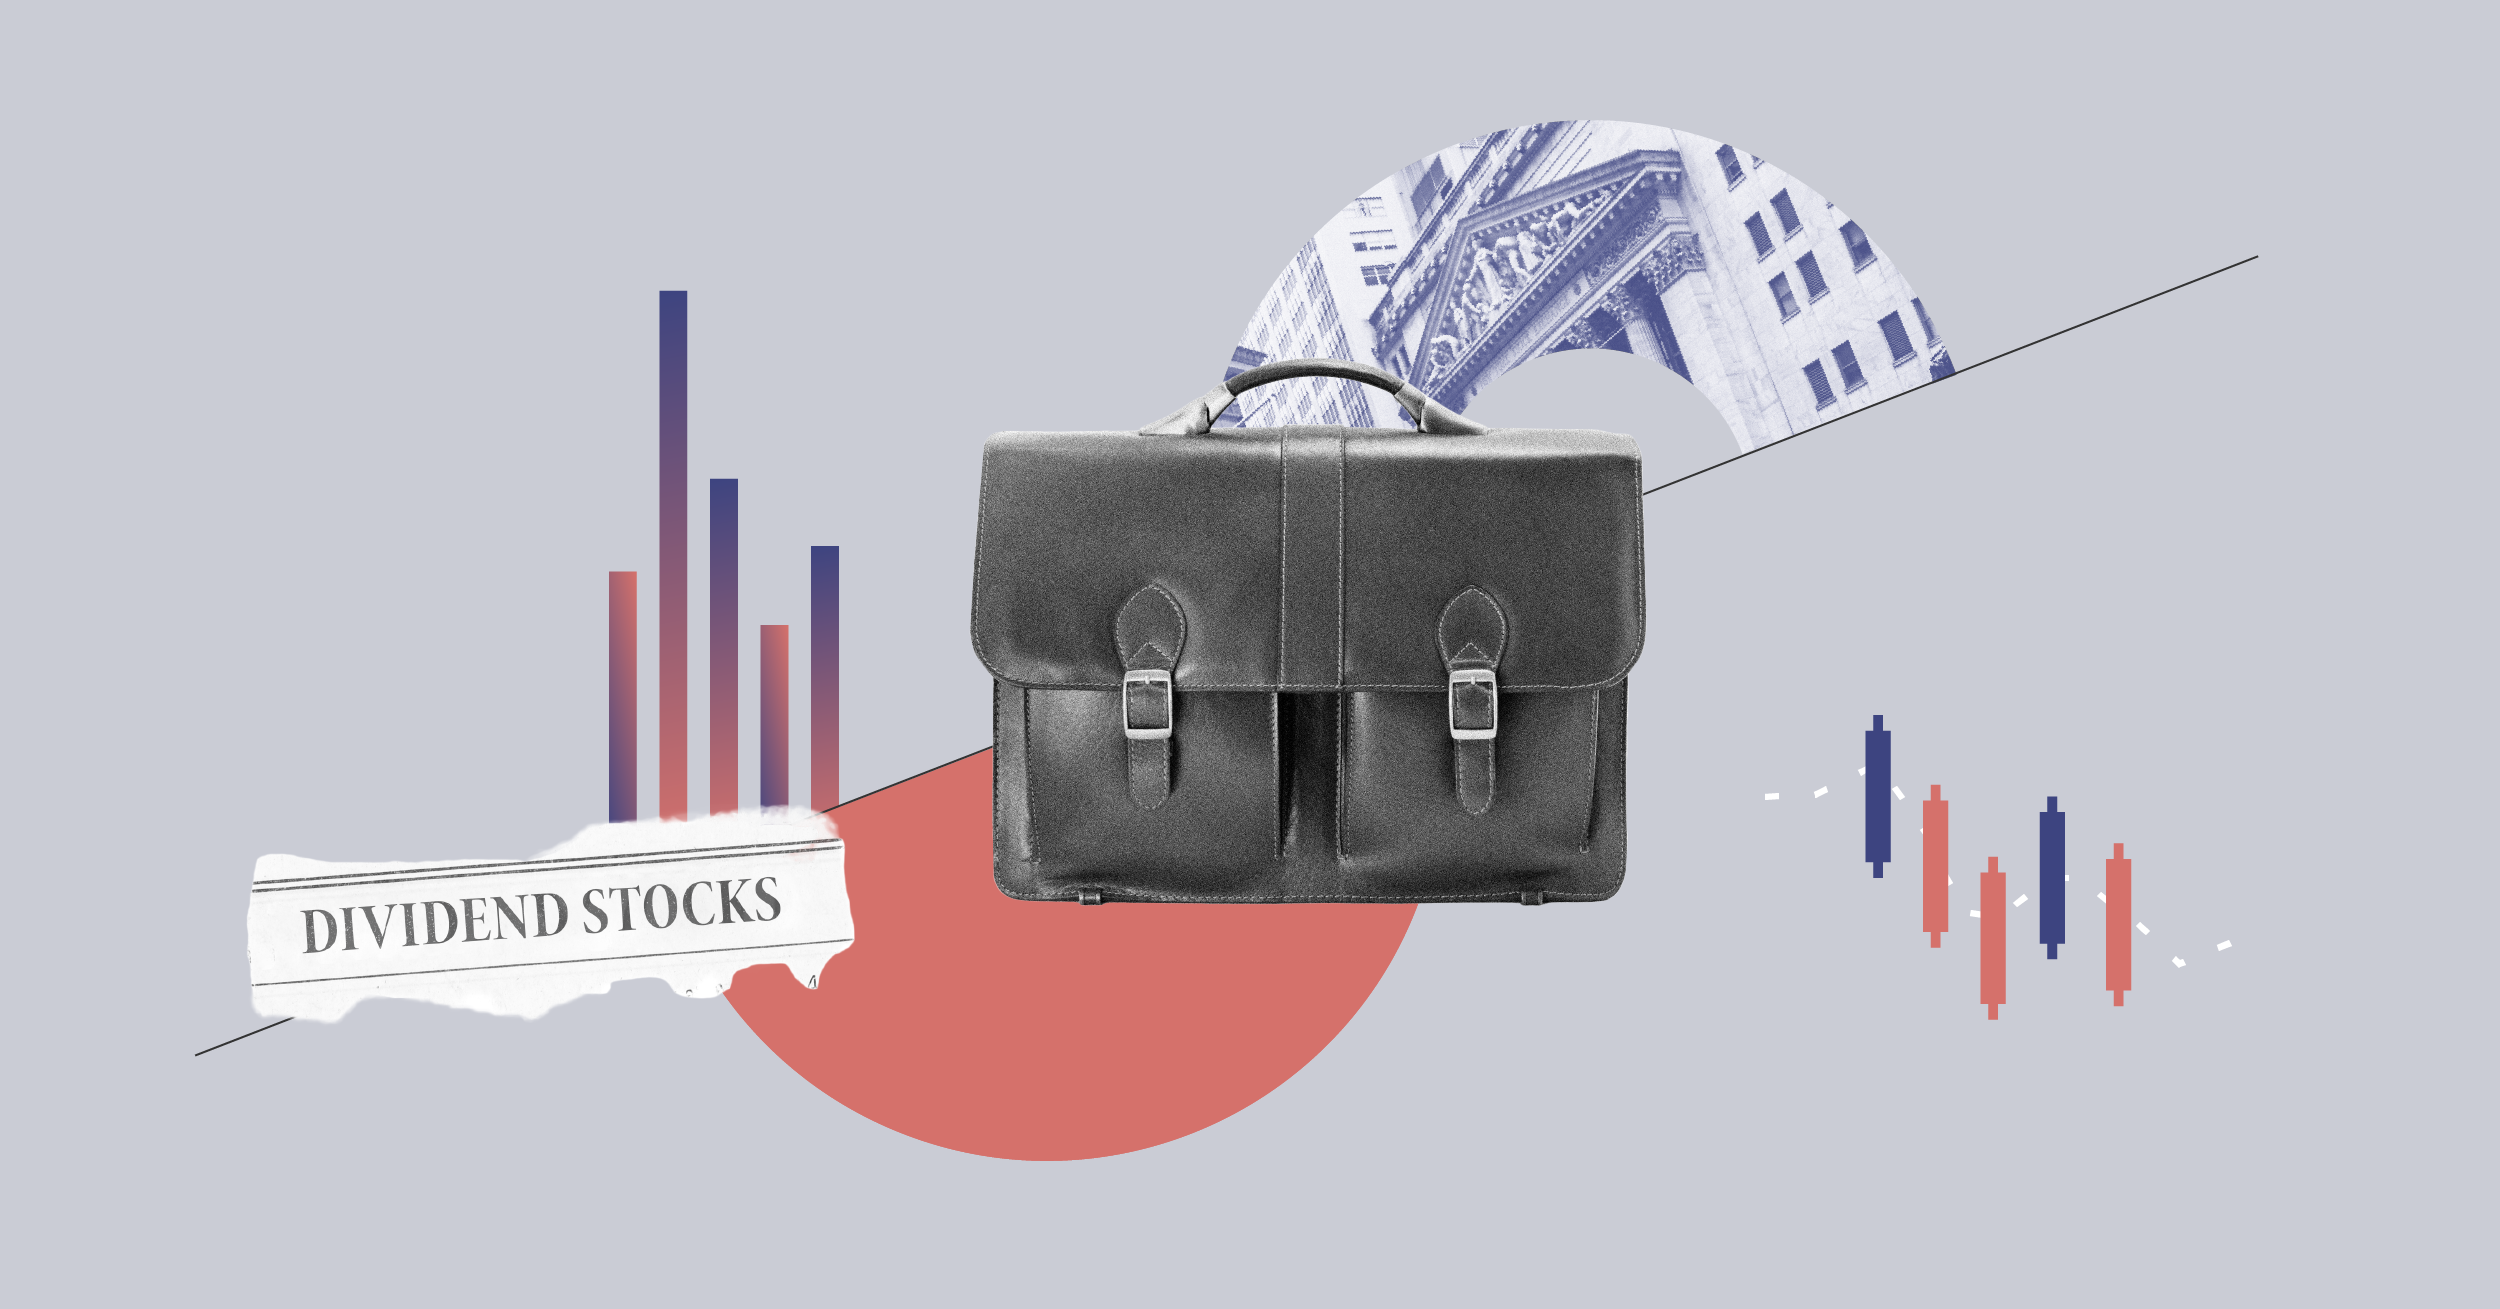 Collage featuring a briefcase, newspaper clipping about Dividend Stocks, and graphical elements.